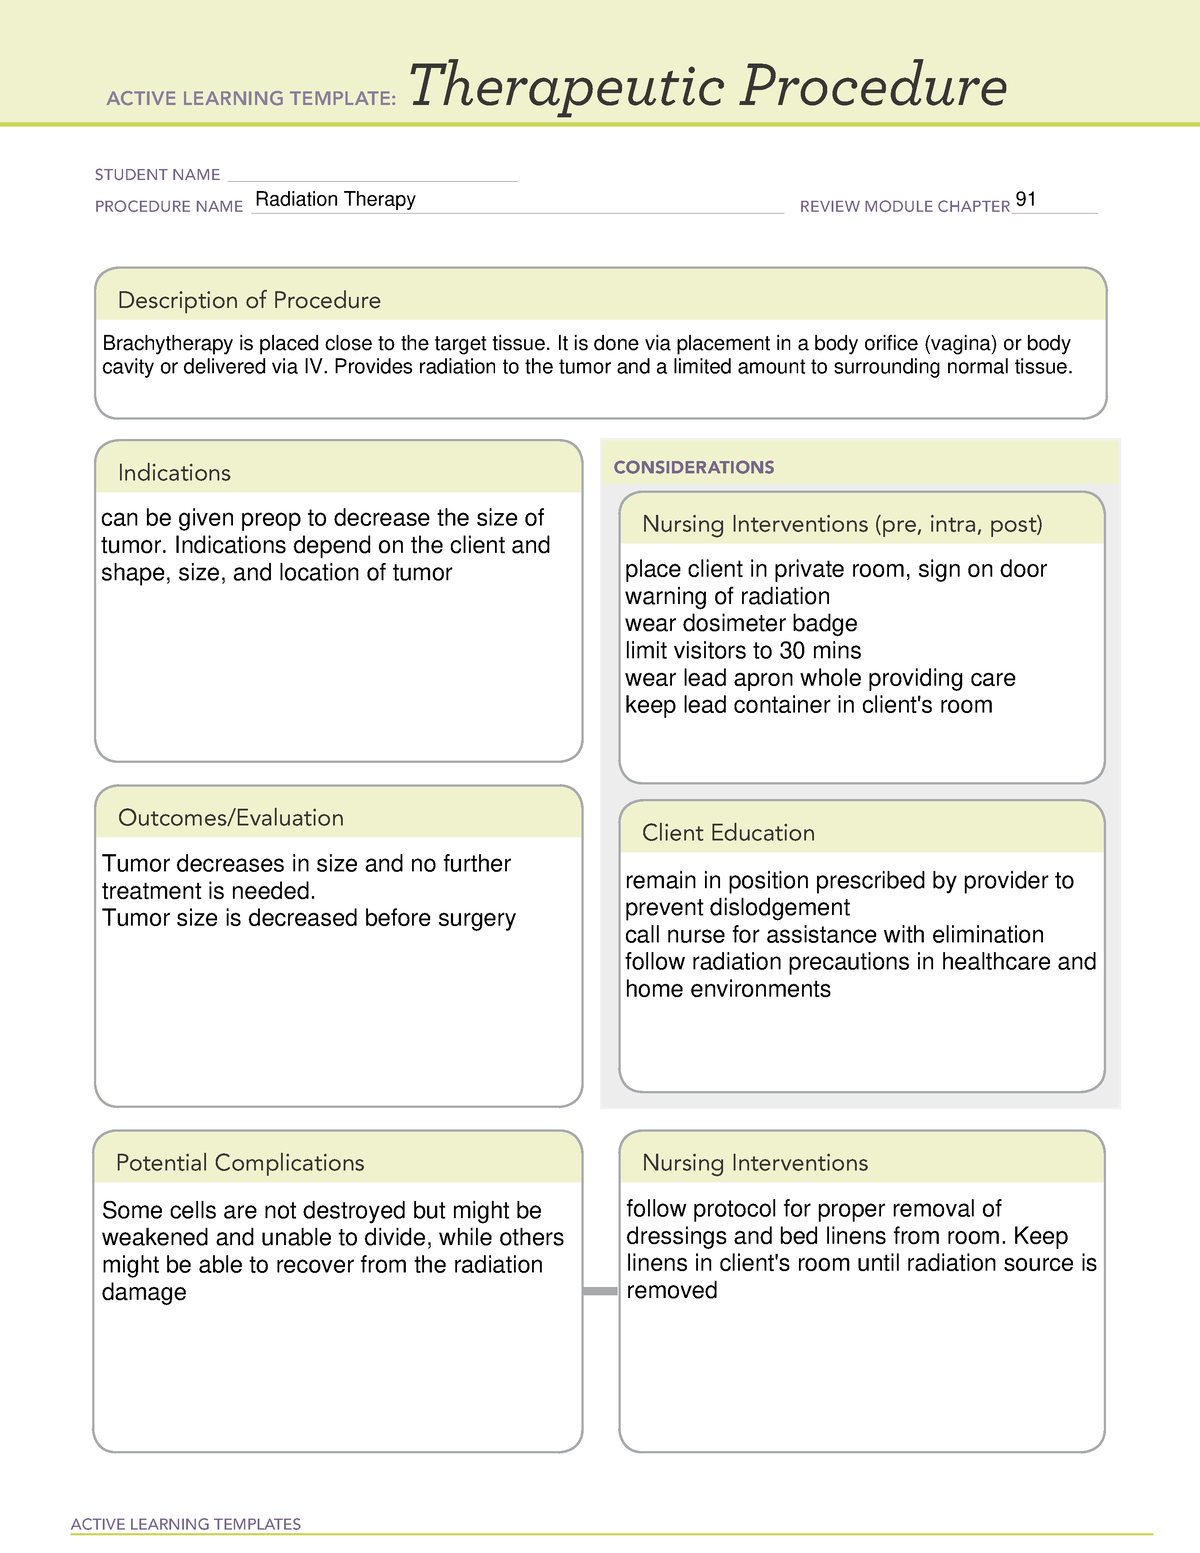 Therapeutic Procedure radiation ACTIVE LEARNING TEMPLATES